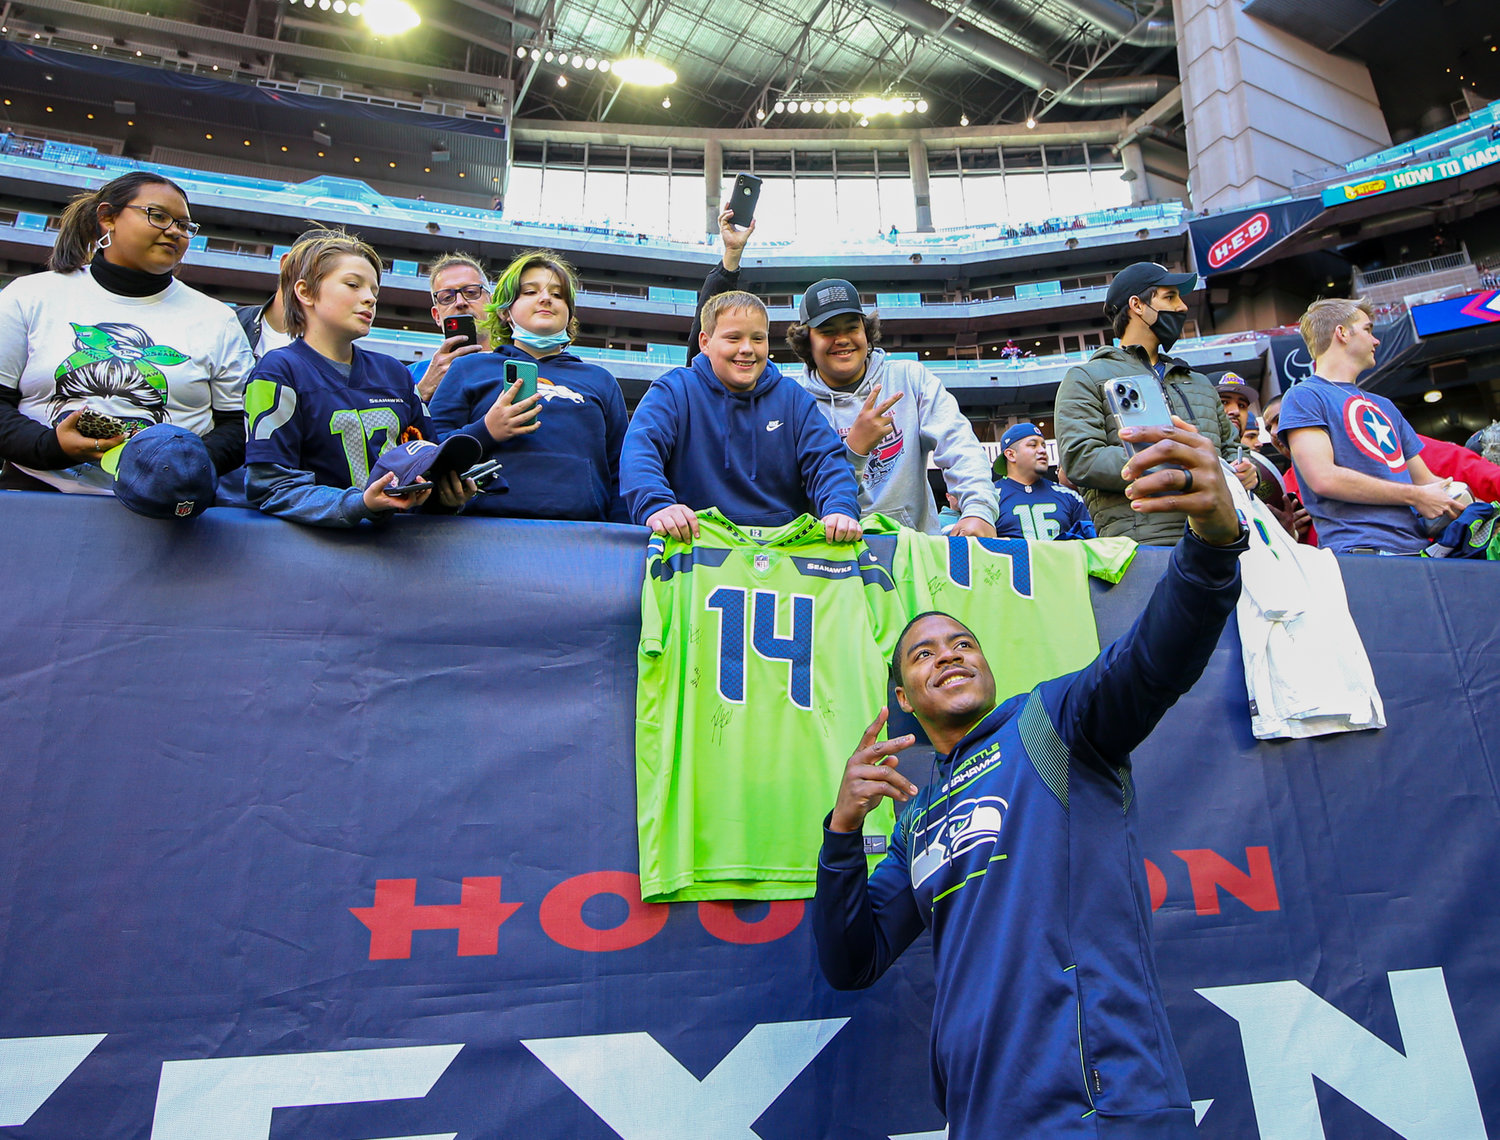 Seattle fans outnumber Texans fans in the stadium early early as wide receiver Freddie Swain (18) takes photos with Seahawks fans before the start of an NFL game on December 12, 2021 in Houston, Texas.